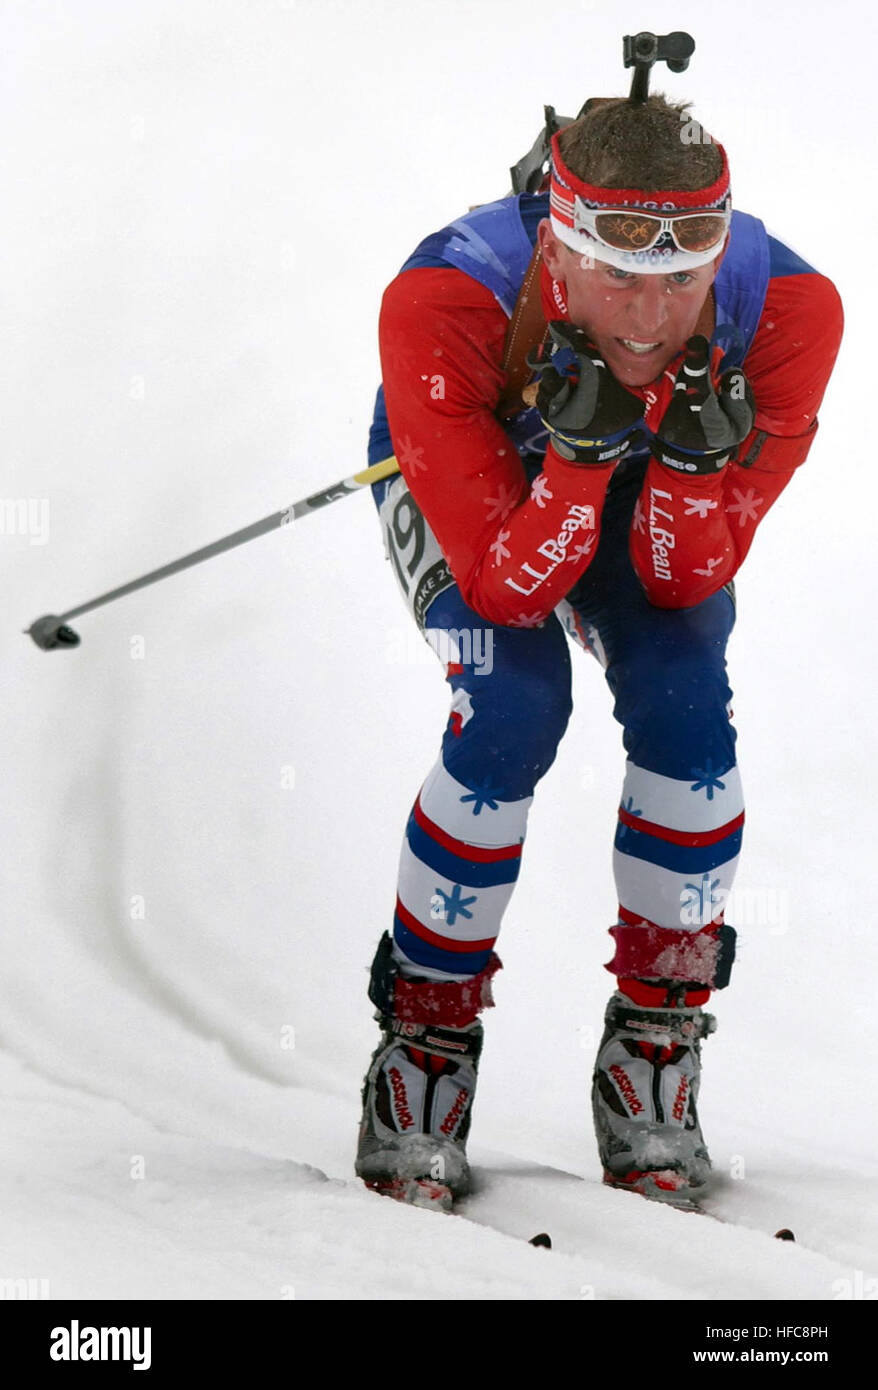 World Class Athlete Sgt. Lawton Redman coasts down a hill during the anchor leg of the men's 4 x  7.5km biathlon relay at Soldier Hollow in Midway, Utah, during the 2002 Winter Olympic Games, Feb. 20, 2002. The United States would finish the race in 15th place, 6:44.8 behind the leader.  (U.S. Navy photo Journalist 1st Class Preston Keres) (Released) Lawton Redman 2002 Winter Olympics Stock Photo